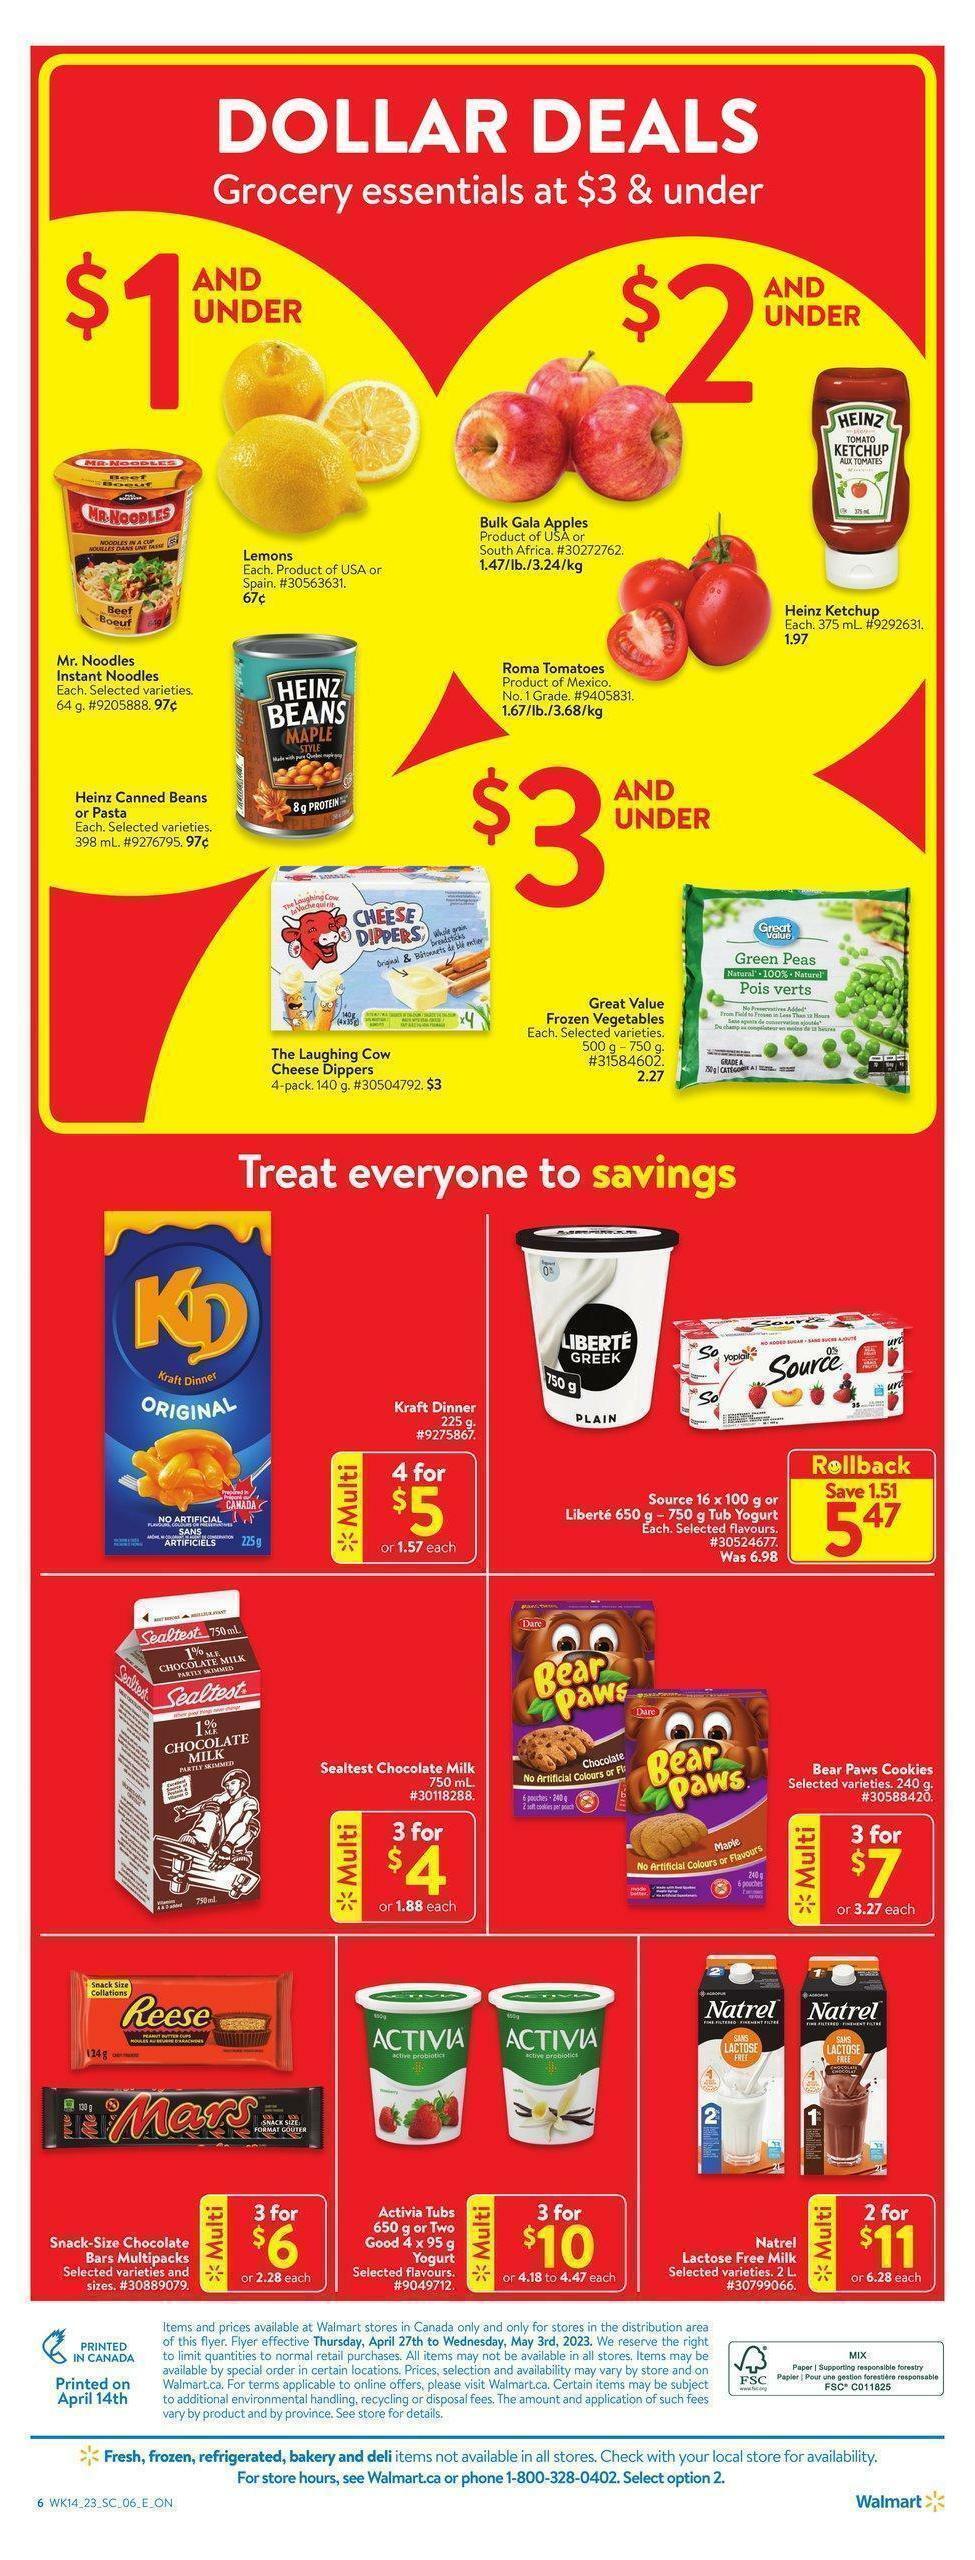 Walmart Flyer from April 27